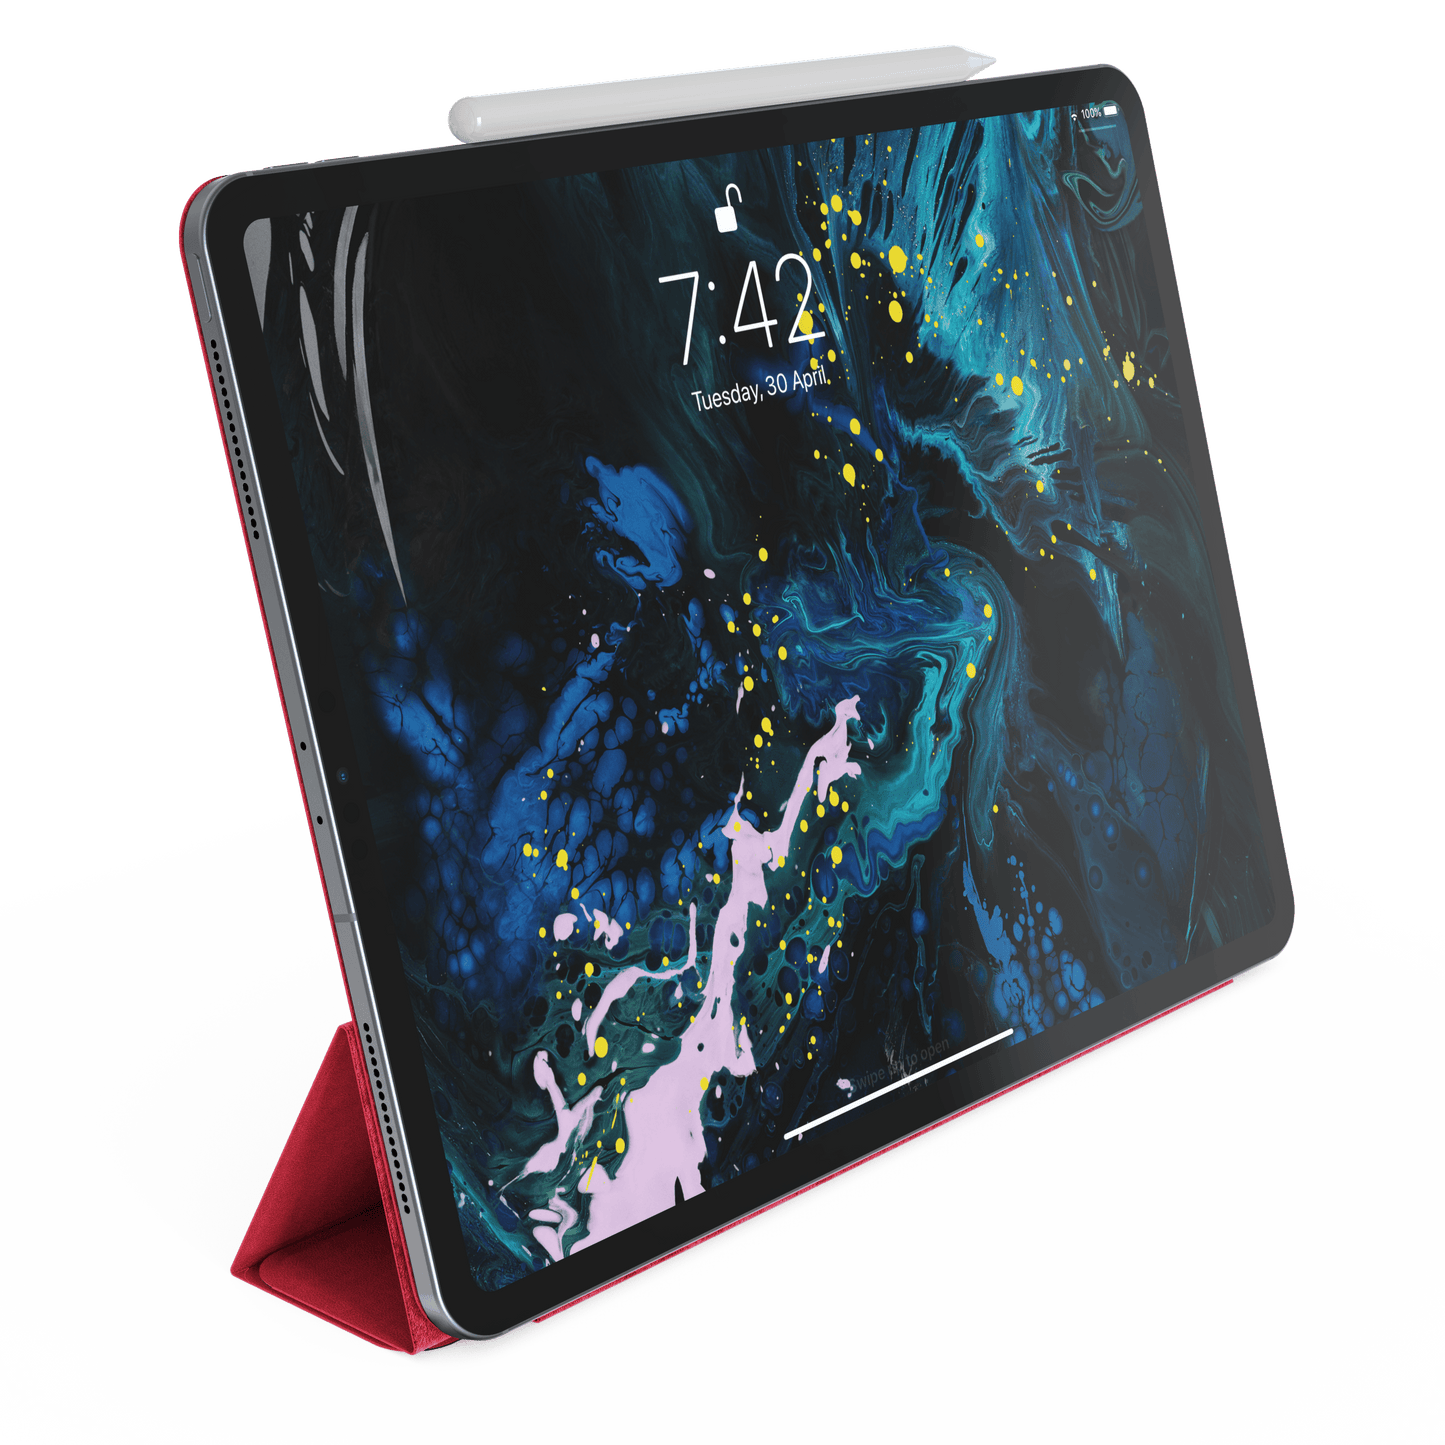 MoArmouz - Magnetic Origami Smart Cover for iPad Pro 12.9-inch, 3rd Gen (2018)